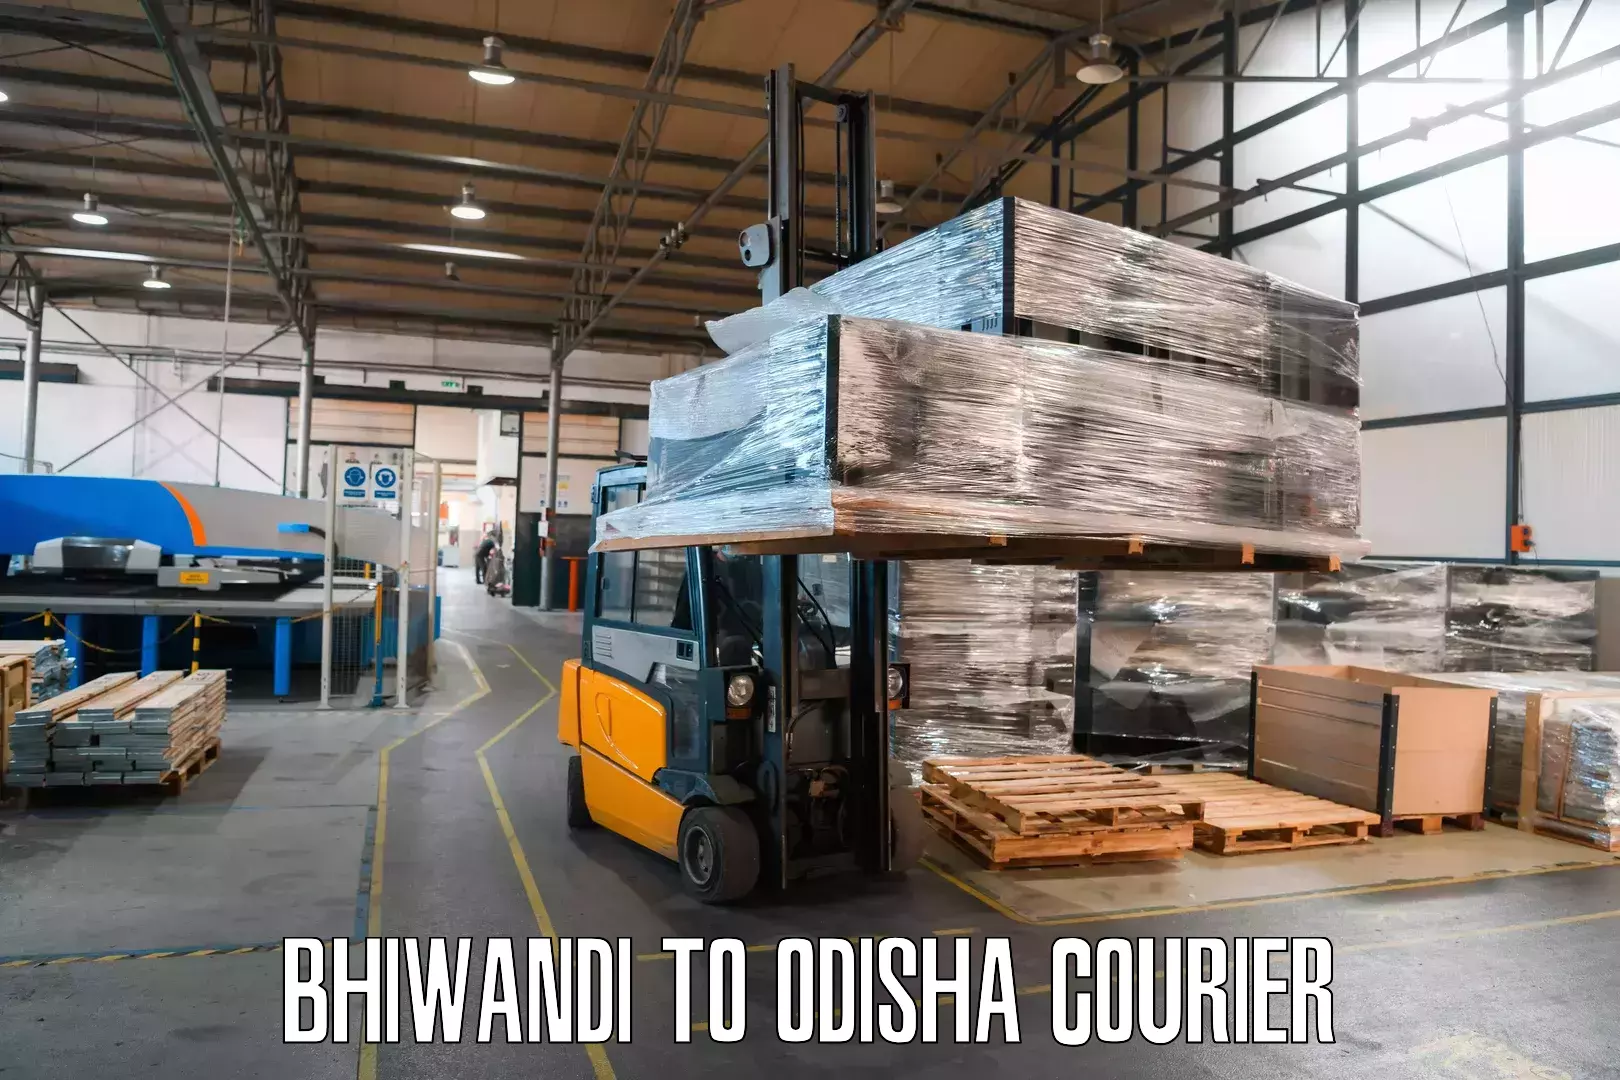 Courier service innovation Bhiwandi to Baleswar